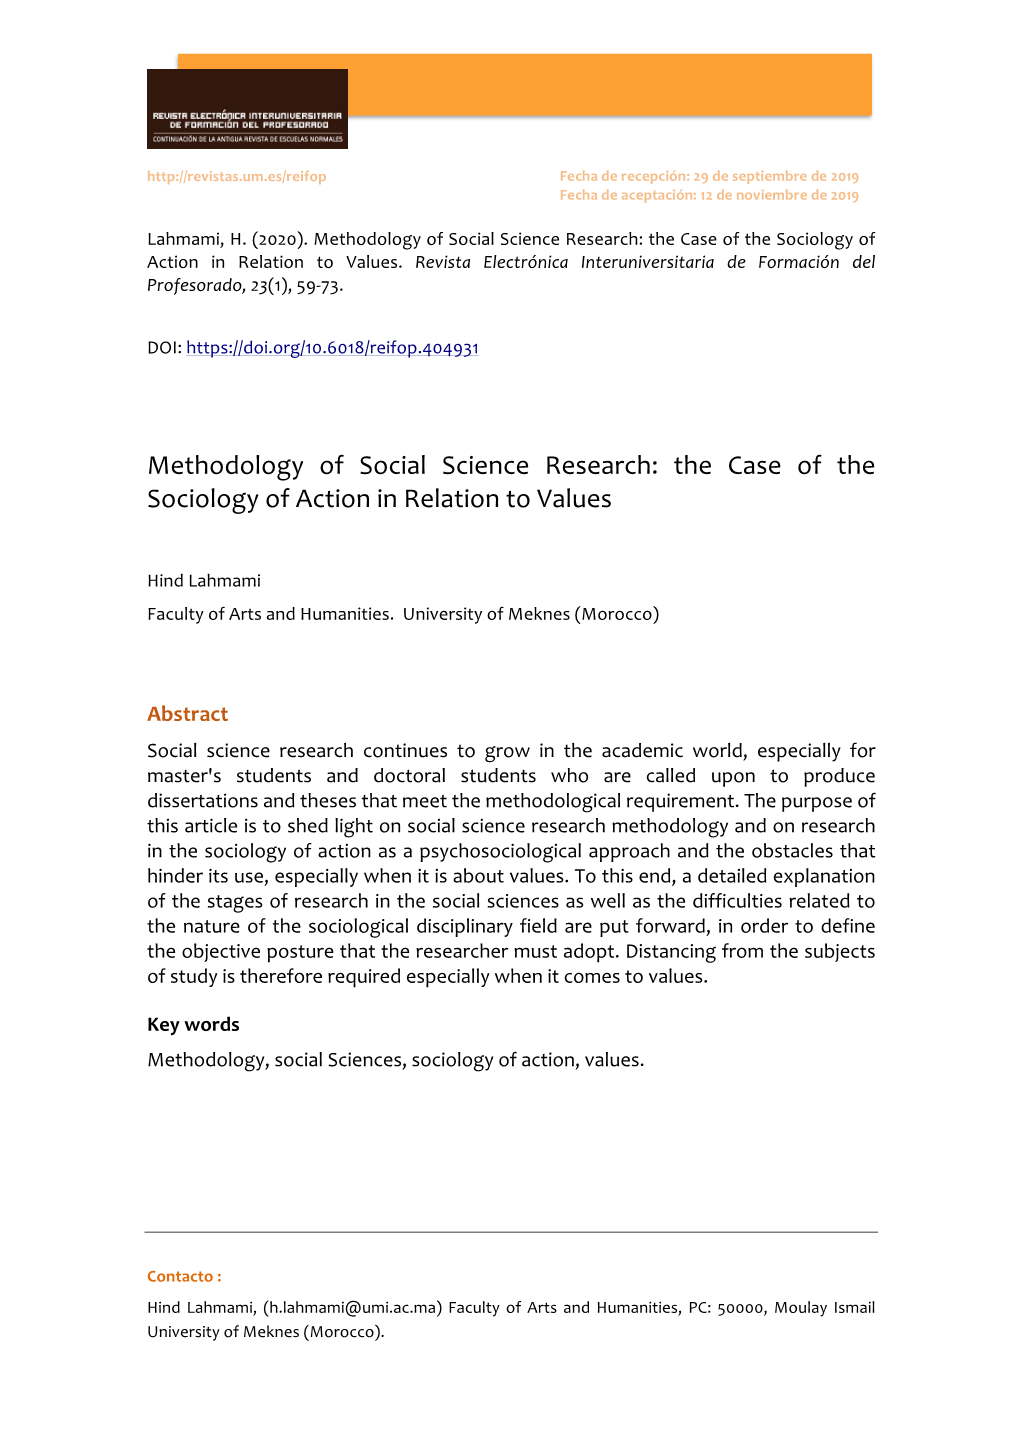 Methodology of Social Science Research: the Case of the Sociology of Action in Relation to Values